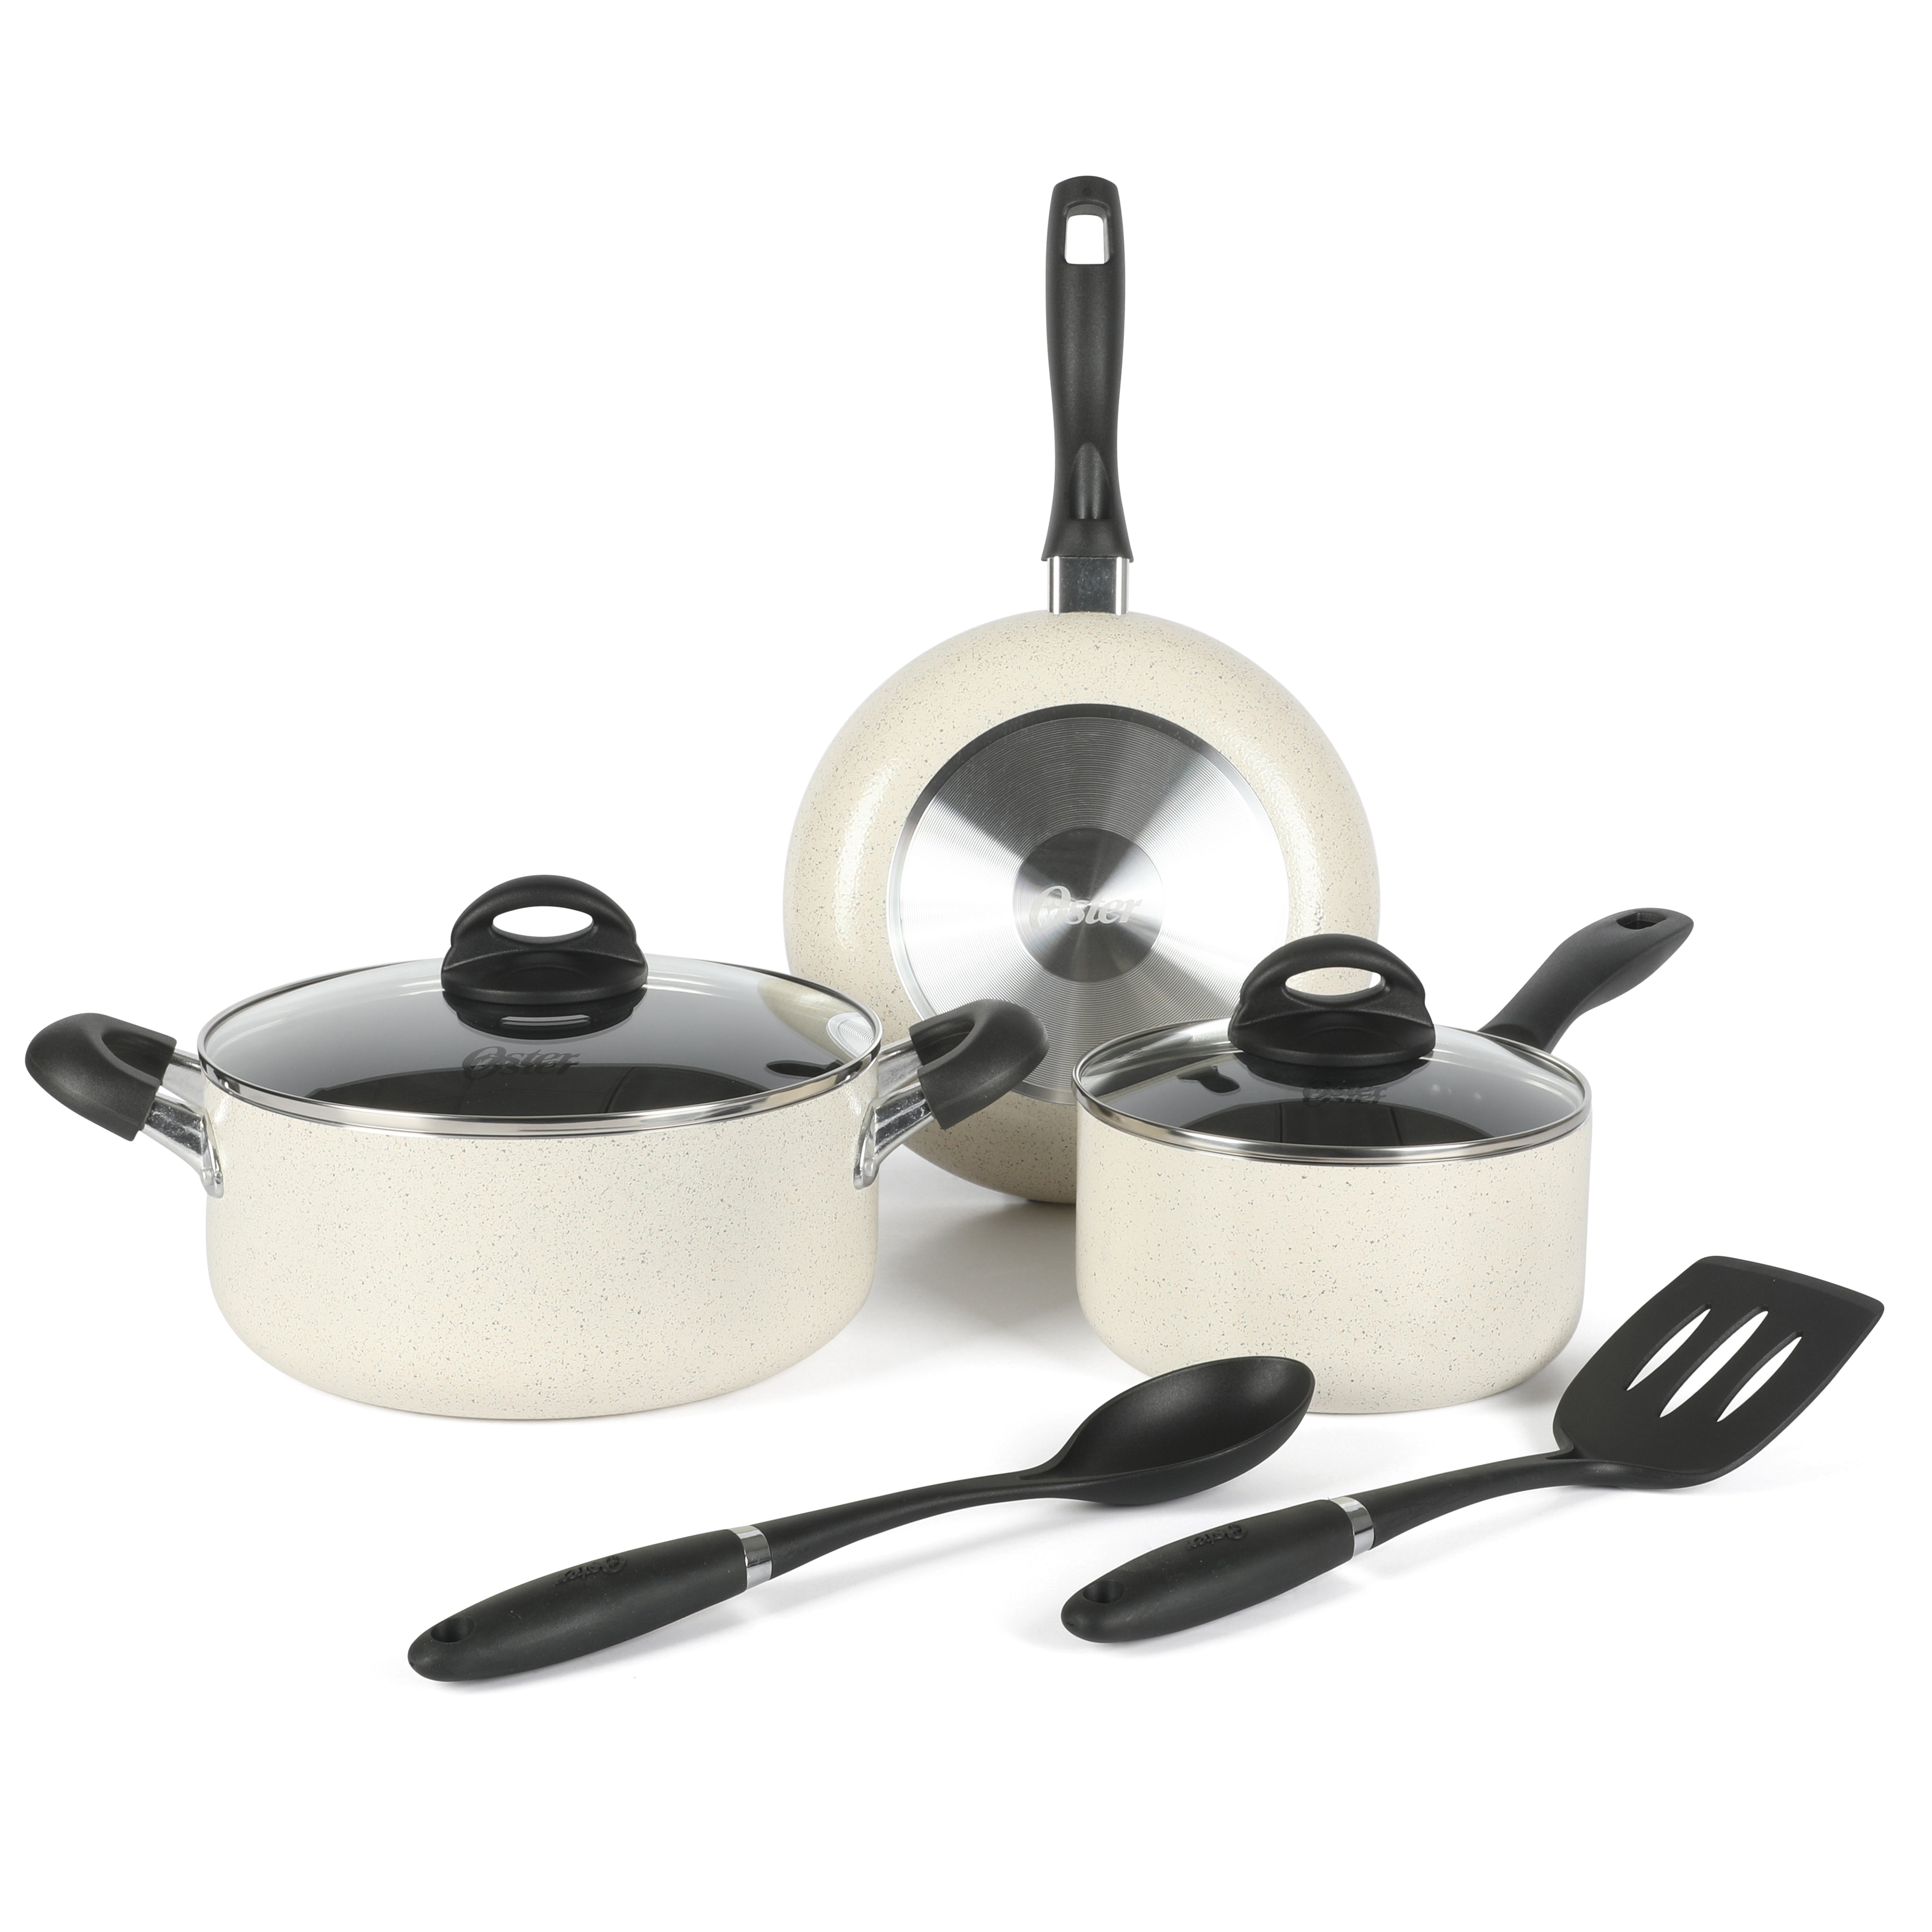 Oster Clairborne 7-Piece Aluminum Premium Nonstick Pots and Pans Cookware Set w/ Induction & Bakelite Stay Cool Handle - White w/ Speckle